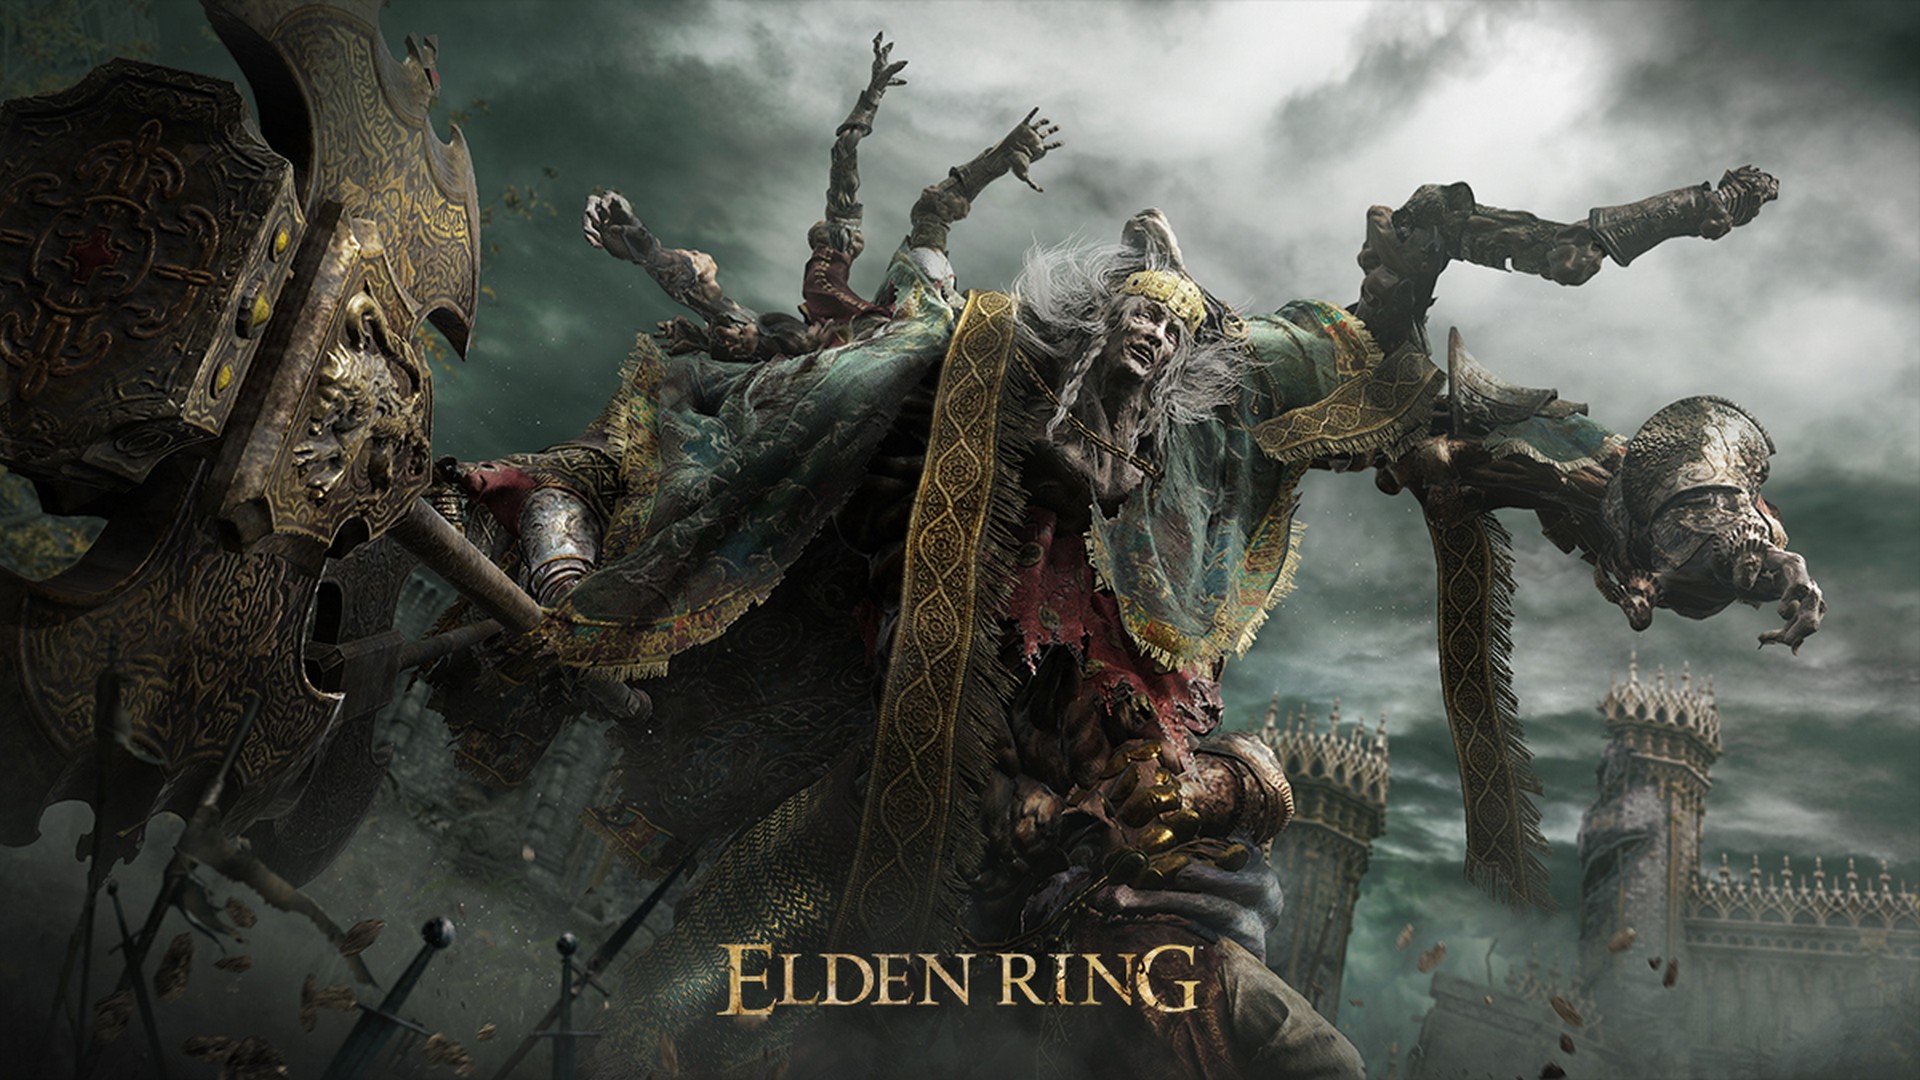 ELDEN RING Closed Network Test Announced – Release Date On February 25 2021